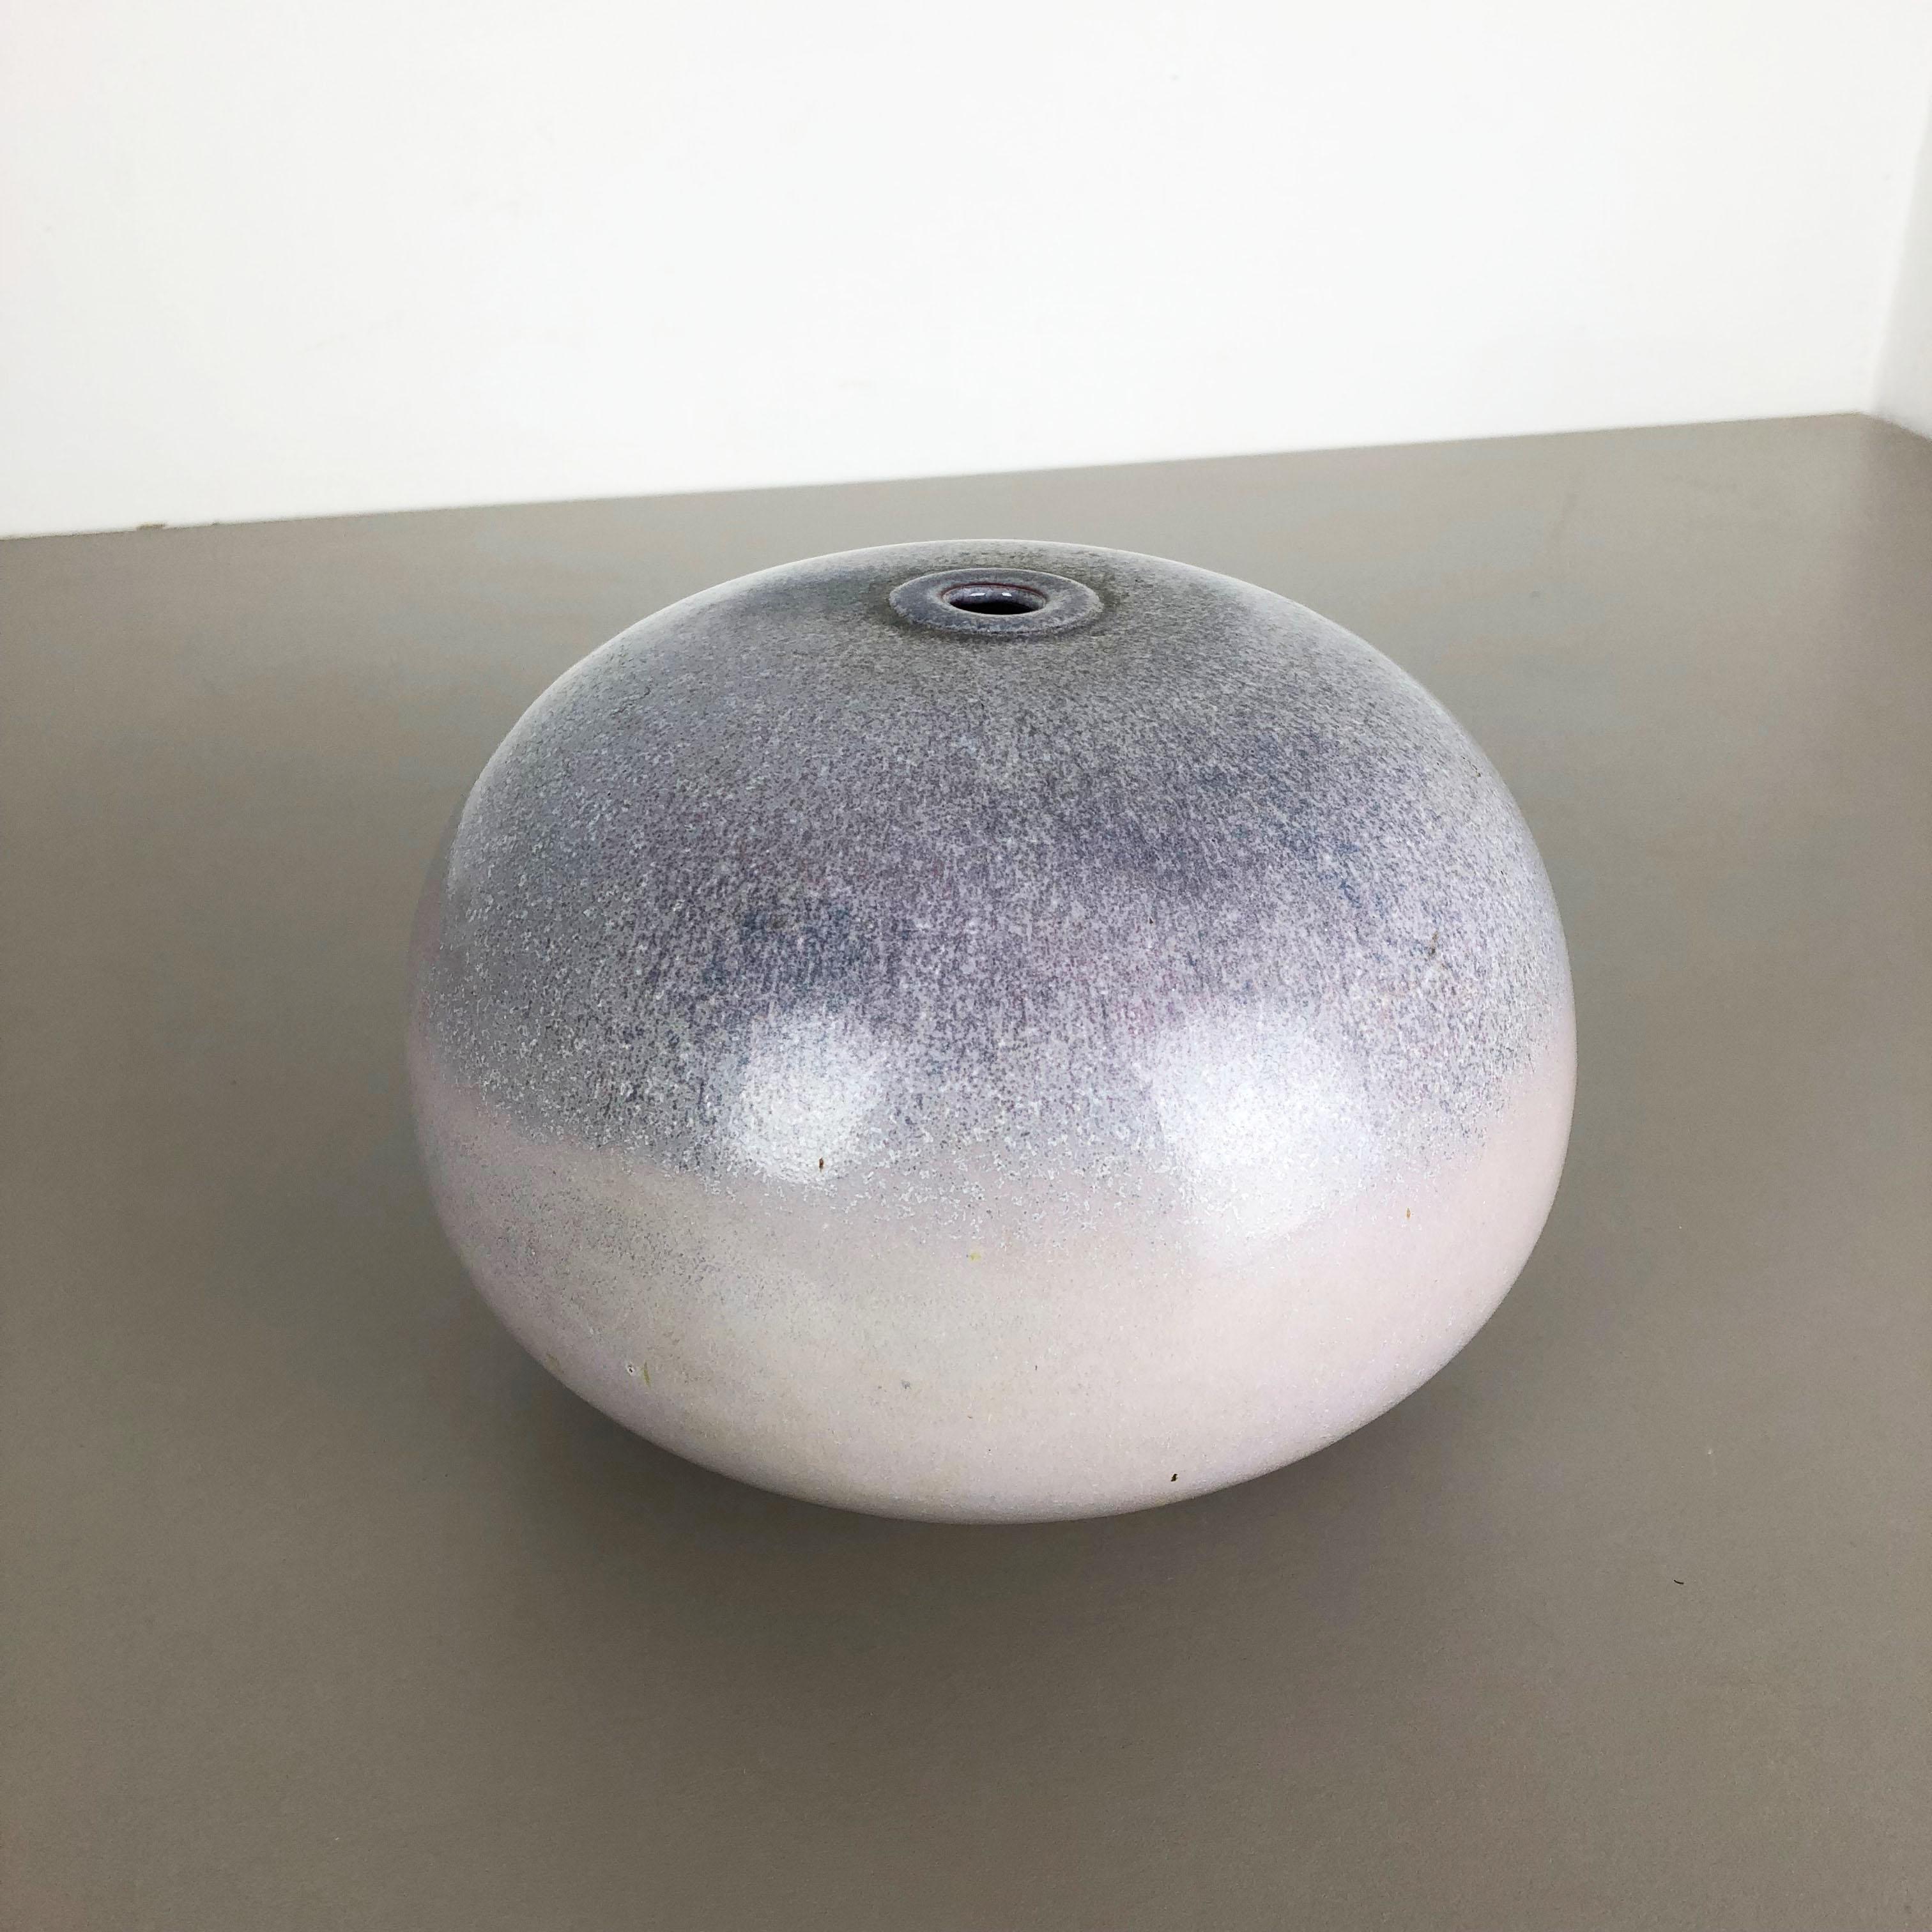 Article:

Studio ceramic vase object


Producer and designer:

Wolfgang Meer, Bremen in Germany



Decade:

1980




This original vintage Studio Pottery vase was designed by Wolfgang Meer and produced in her own Studio in the